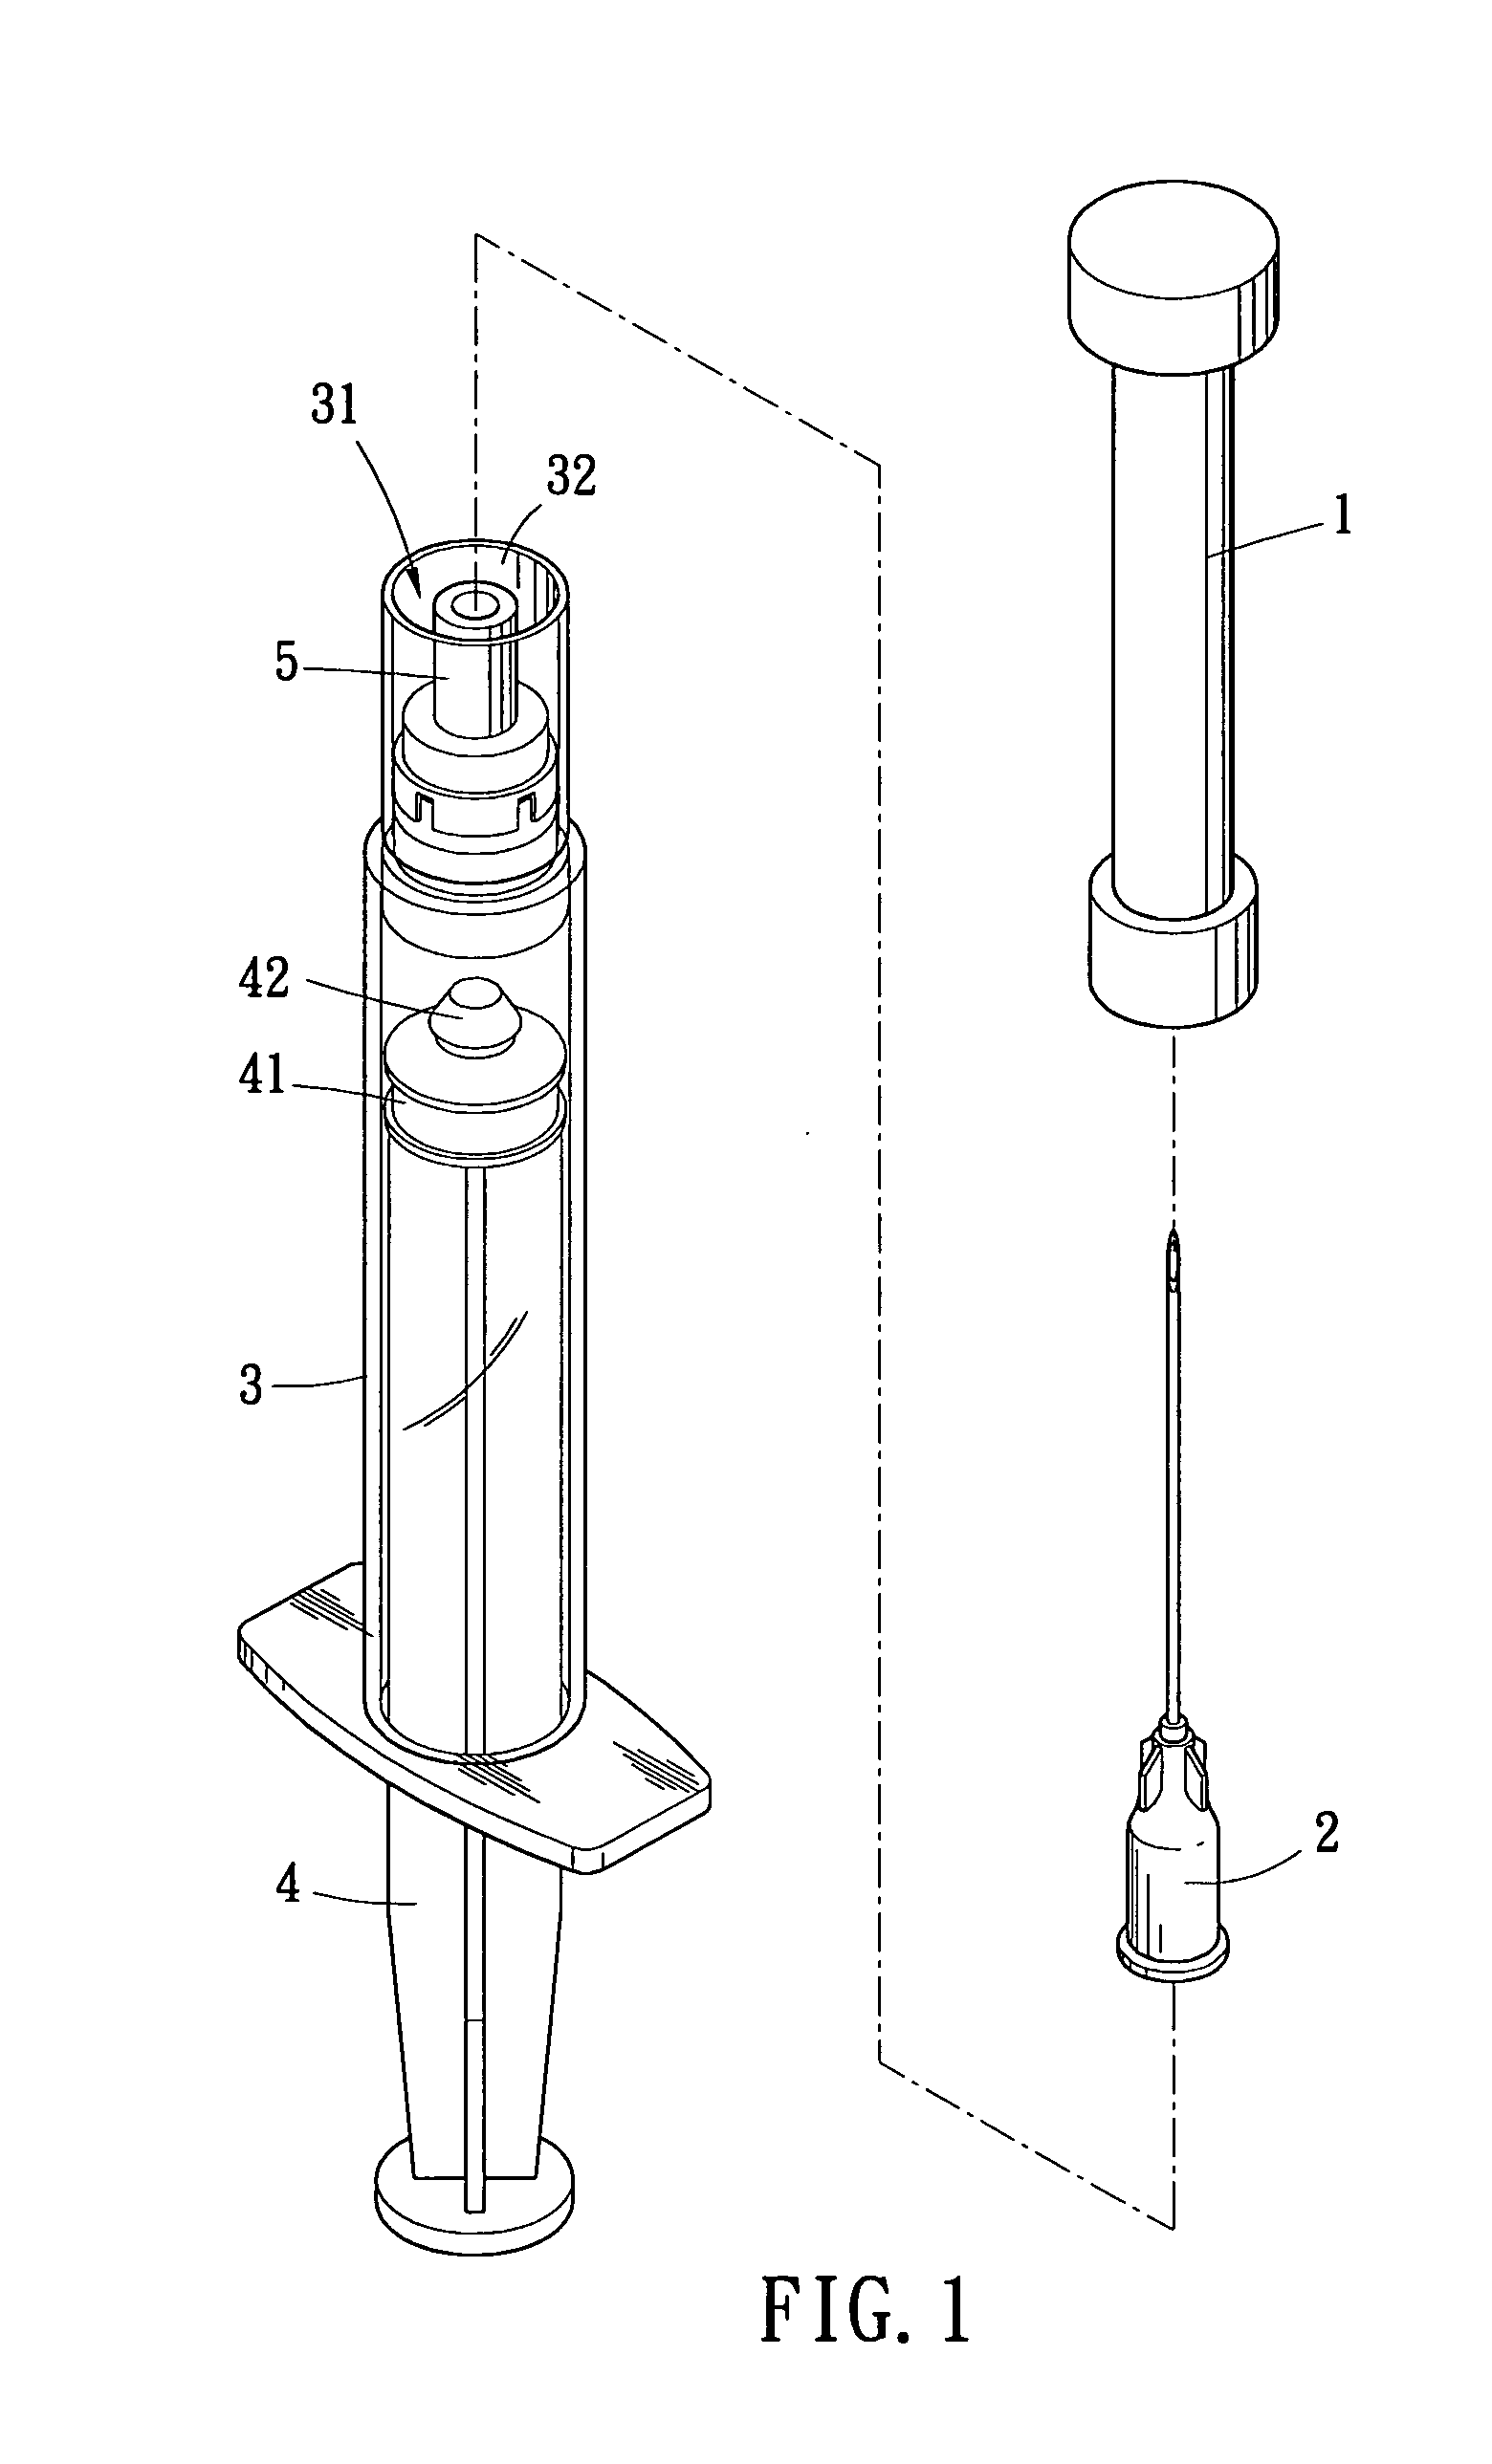 Leakproof needle cover structure improvement